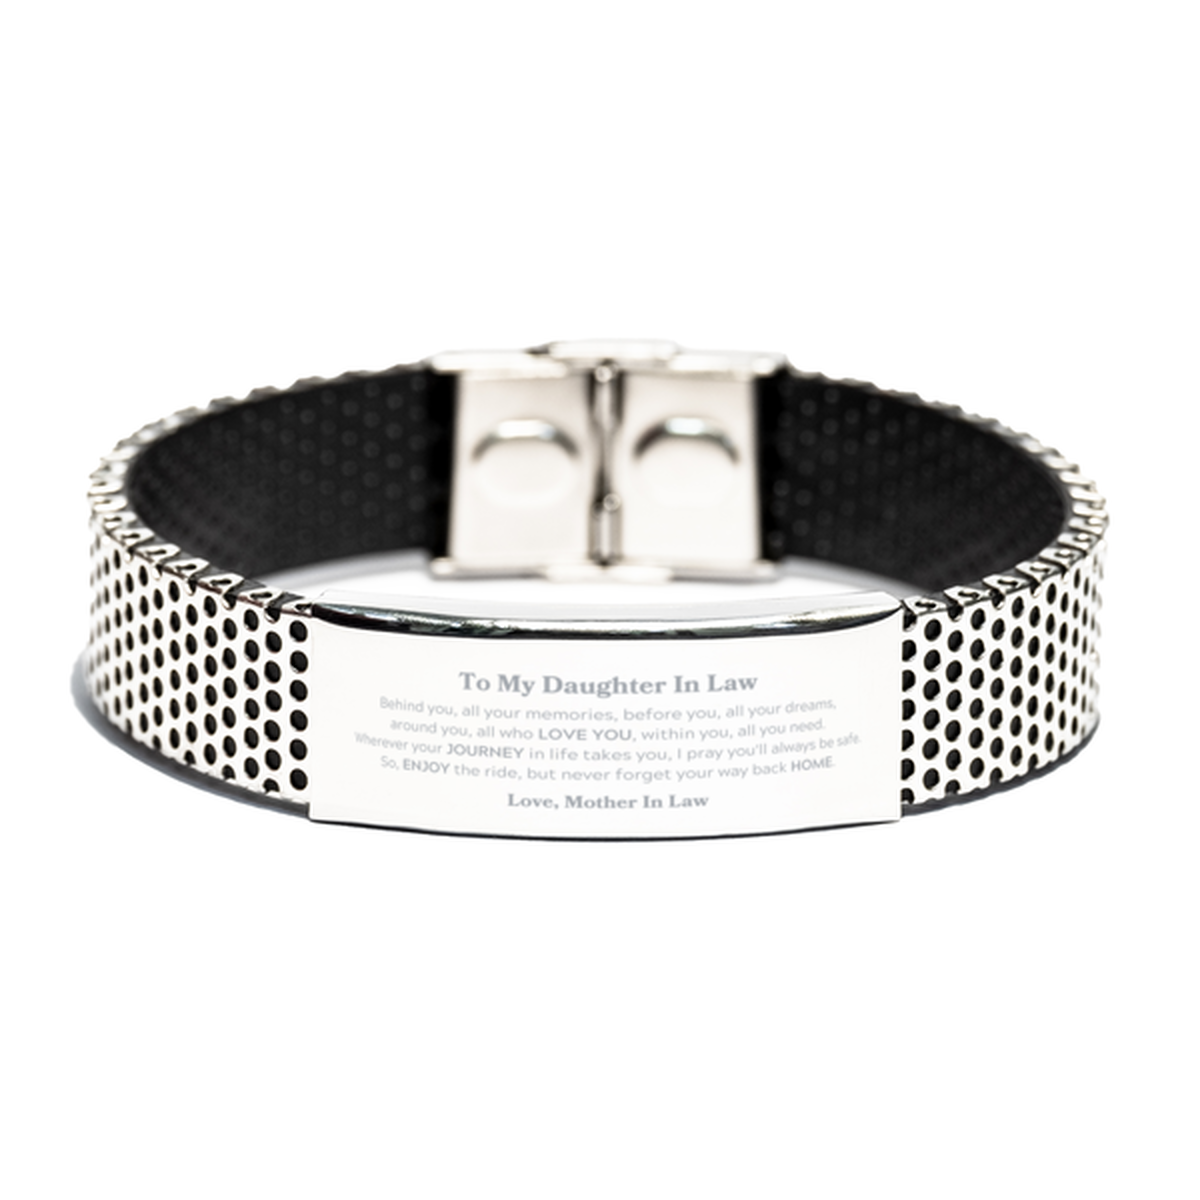 To My Daughter In Law Graduation Gifts from Mother In Law, Daughter In Law Stainless Steel Bracelet Christmas Birthday Gifts for Daughter In Law Behind you, all your memories, before you, all your dreams. Love, Mother In Law